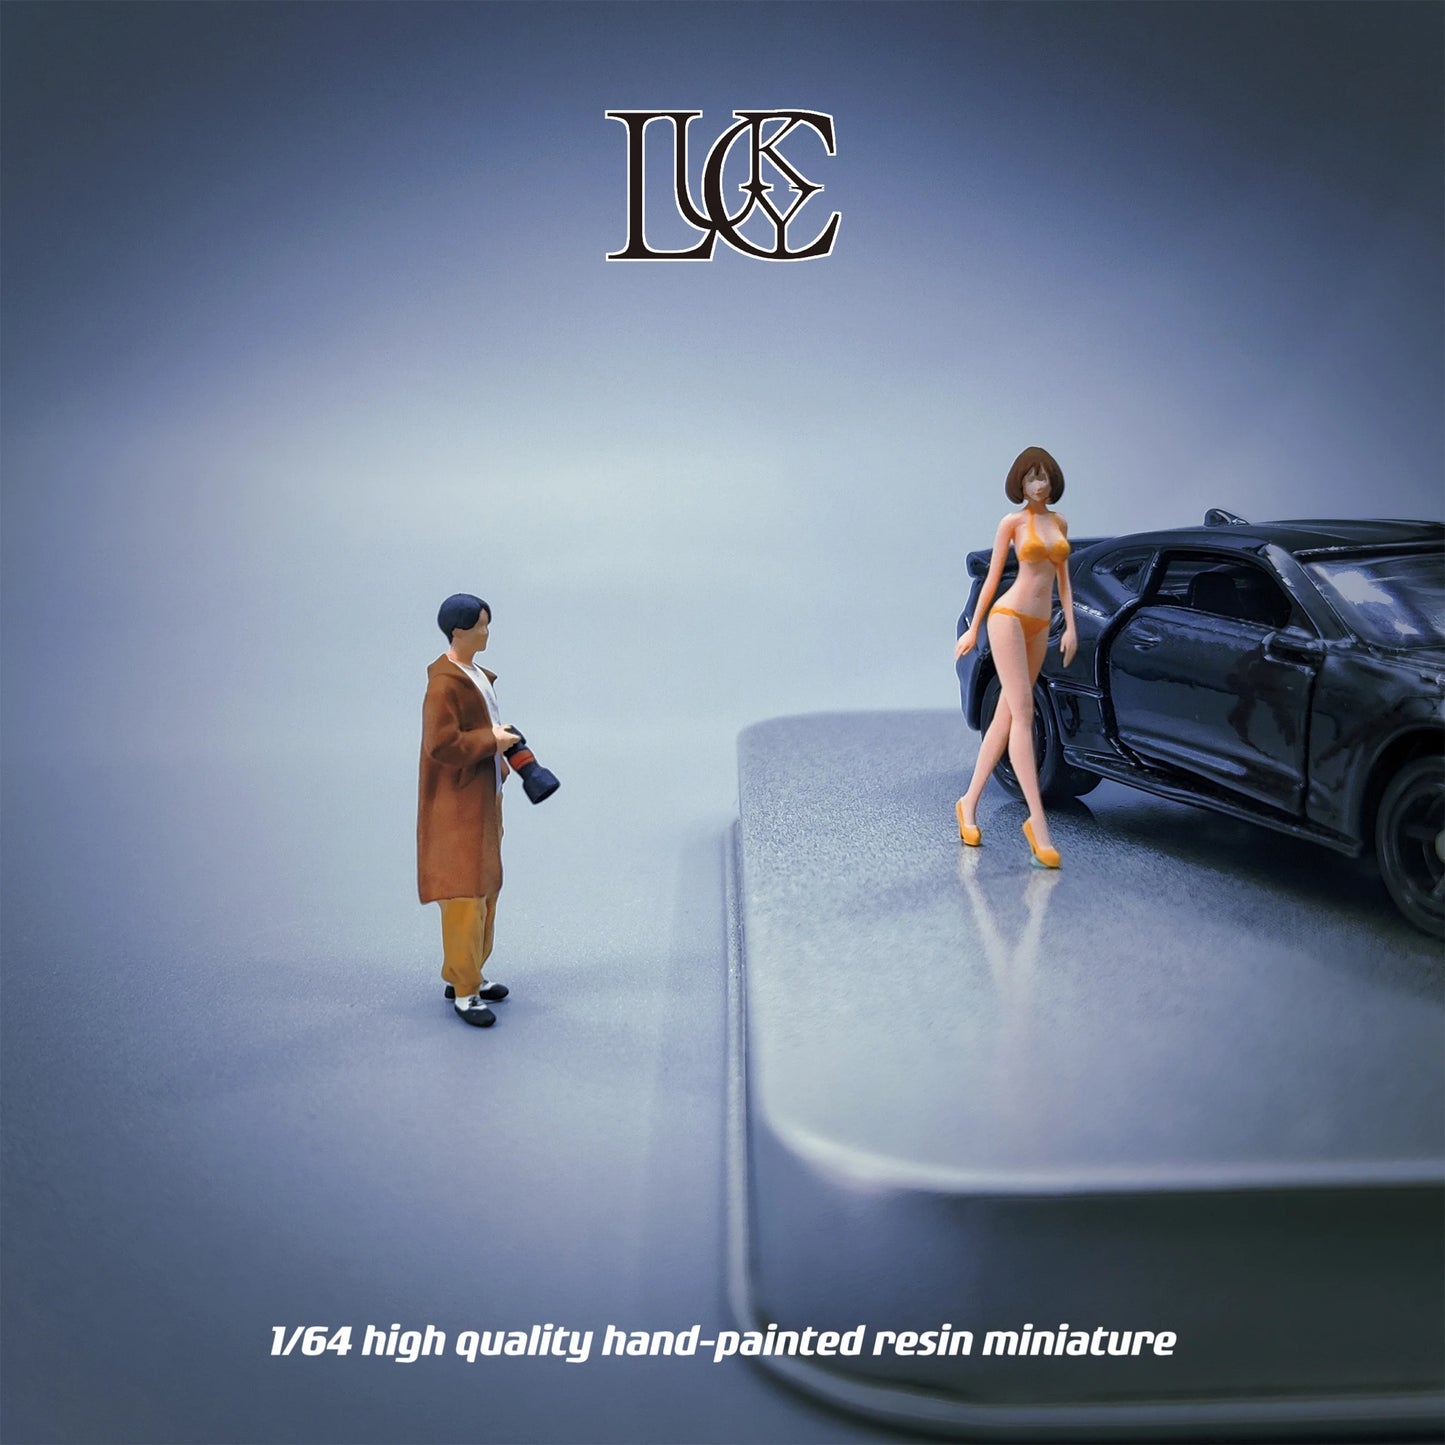 Lucky Studio Diorama 1/64 Scale Figurines Model SLR Male and Female Model Auto Show Collection Miniature Hand-painted